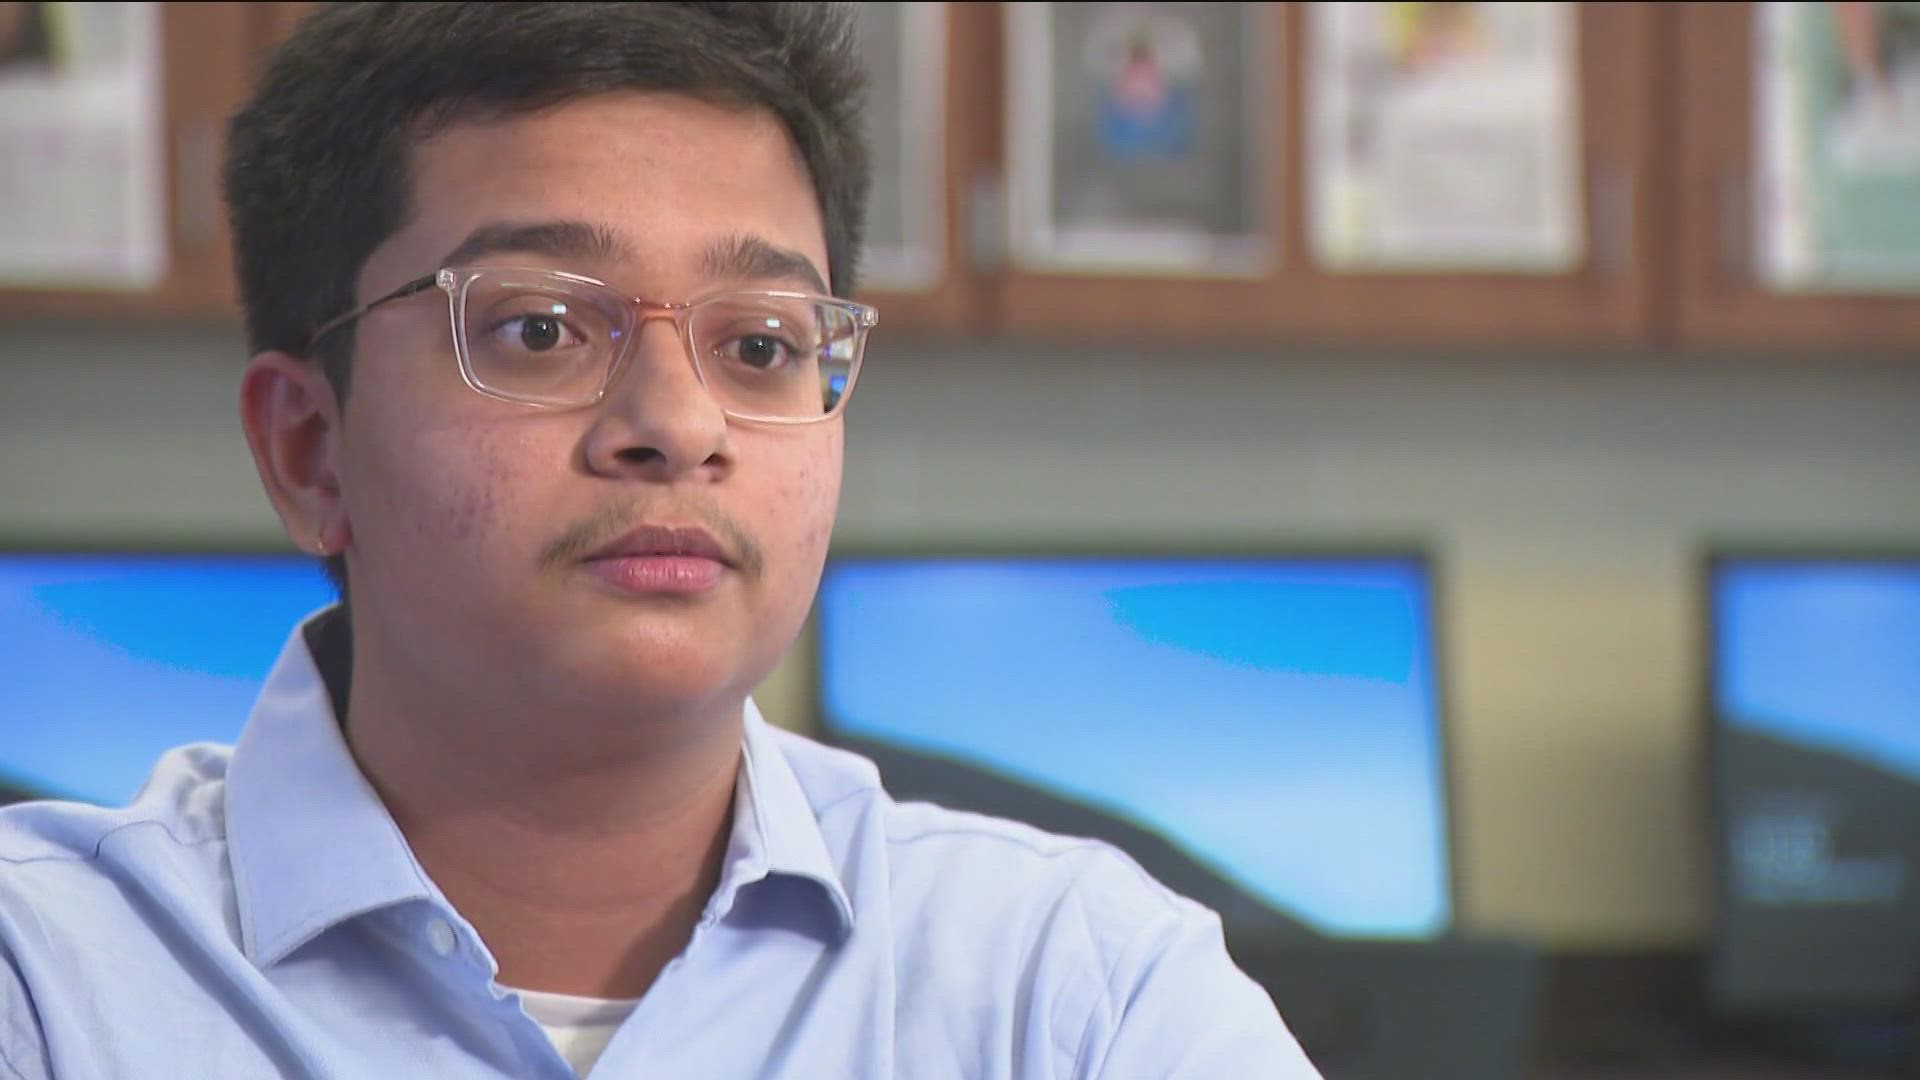 High school senior Aditya Velamuri taught himself calculus when he was living in India. When he moved to Texas last year, he started tutoring fellow students.